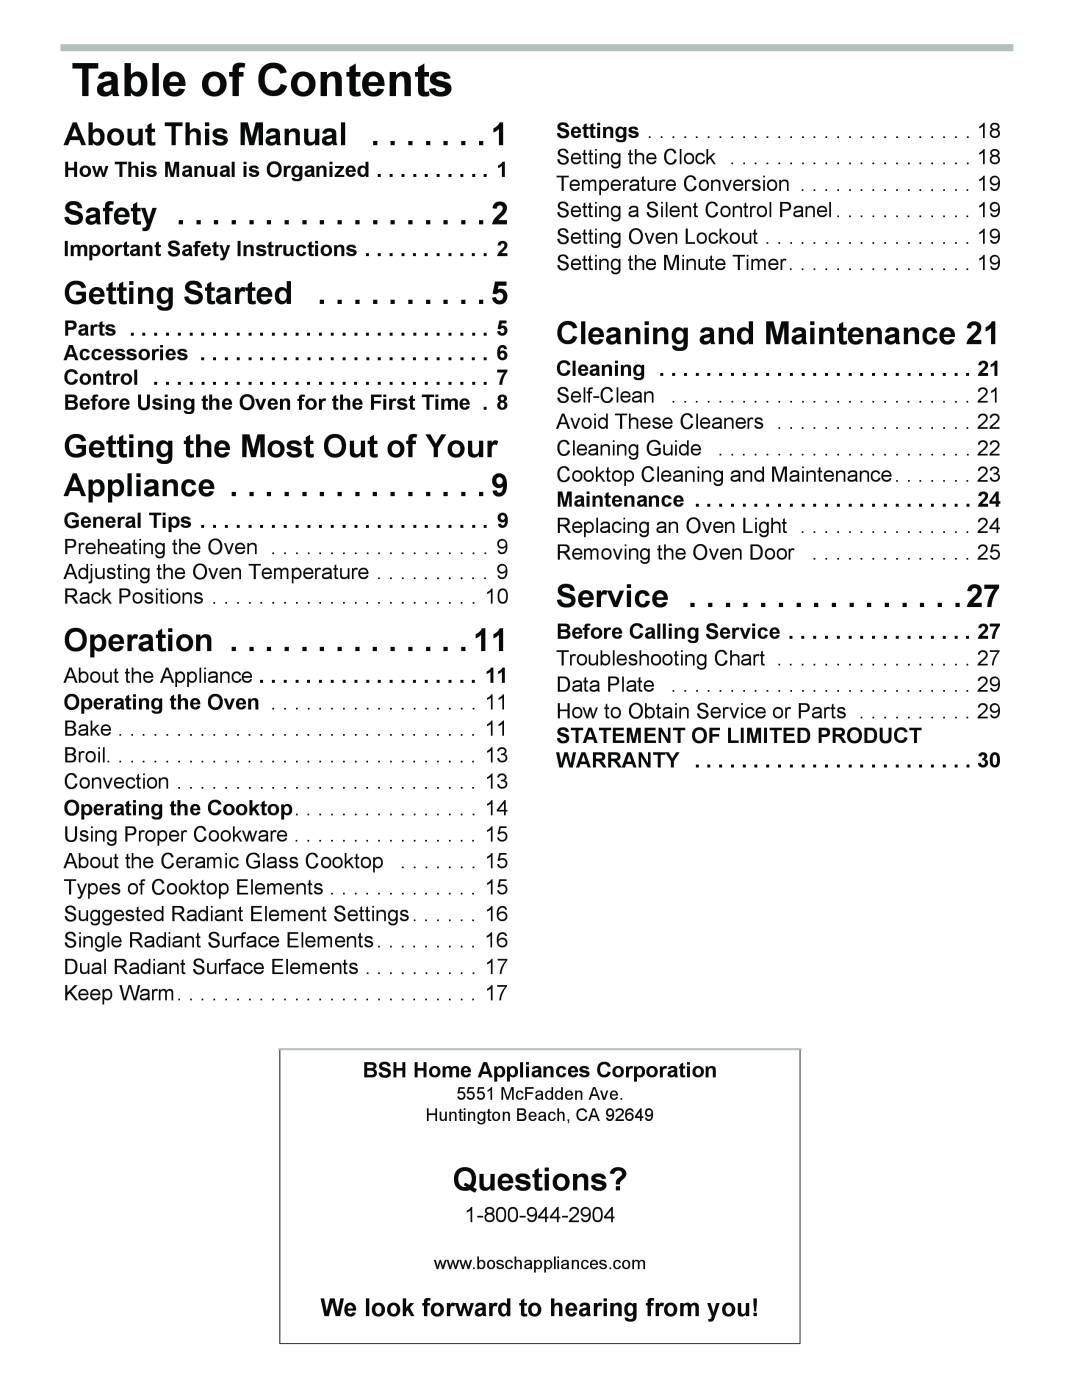 Bosch Appliances HES3053U Table of Contents, About This Manual, Safety, Getting Started, Operation, Service, Questions? 